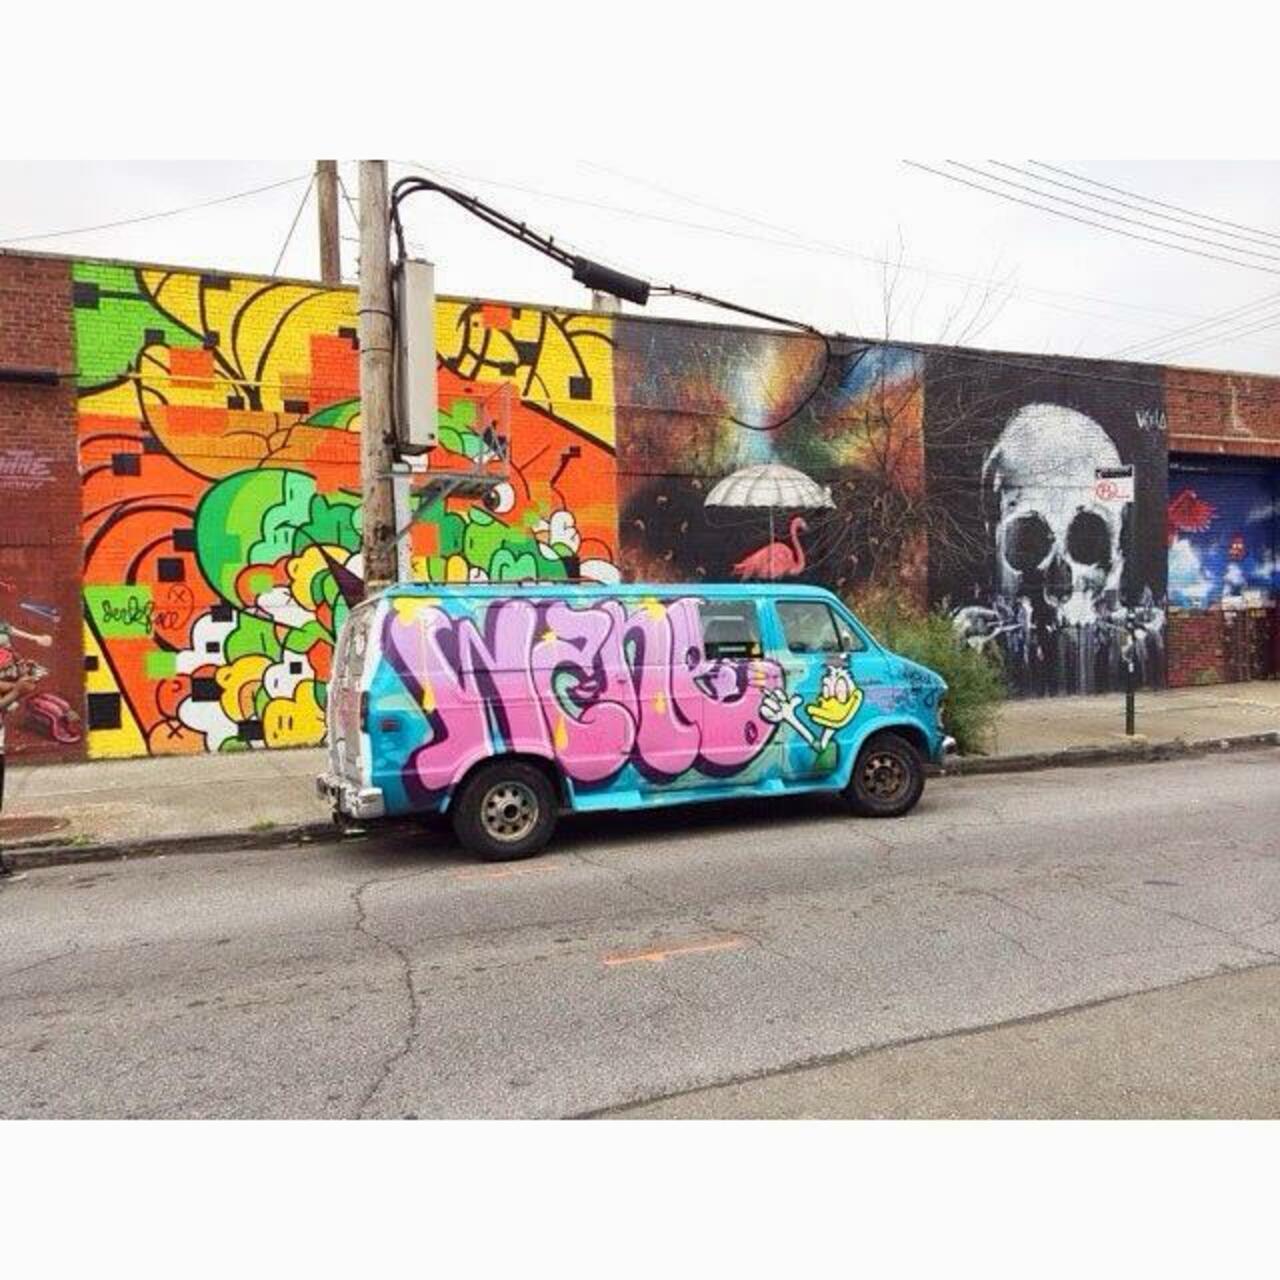 I saw this van in #brooklyn . Does anyone know of the #artist ? #streetart #graffiti http://t.co/5xWj1YBmUh